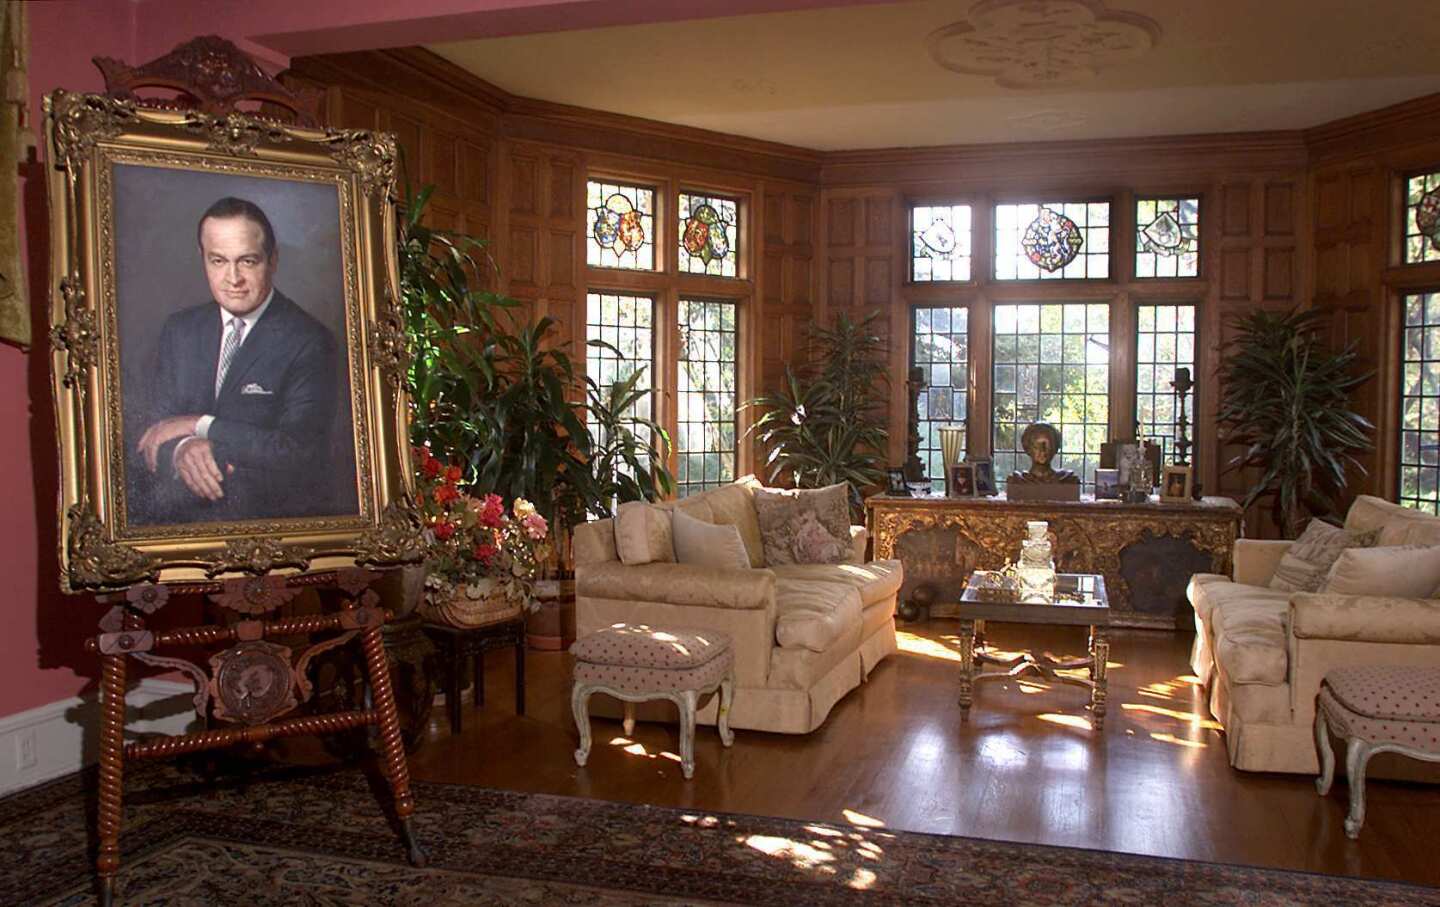 Phyllis Diller's living room